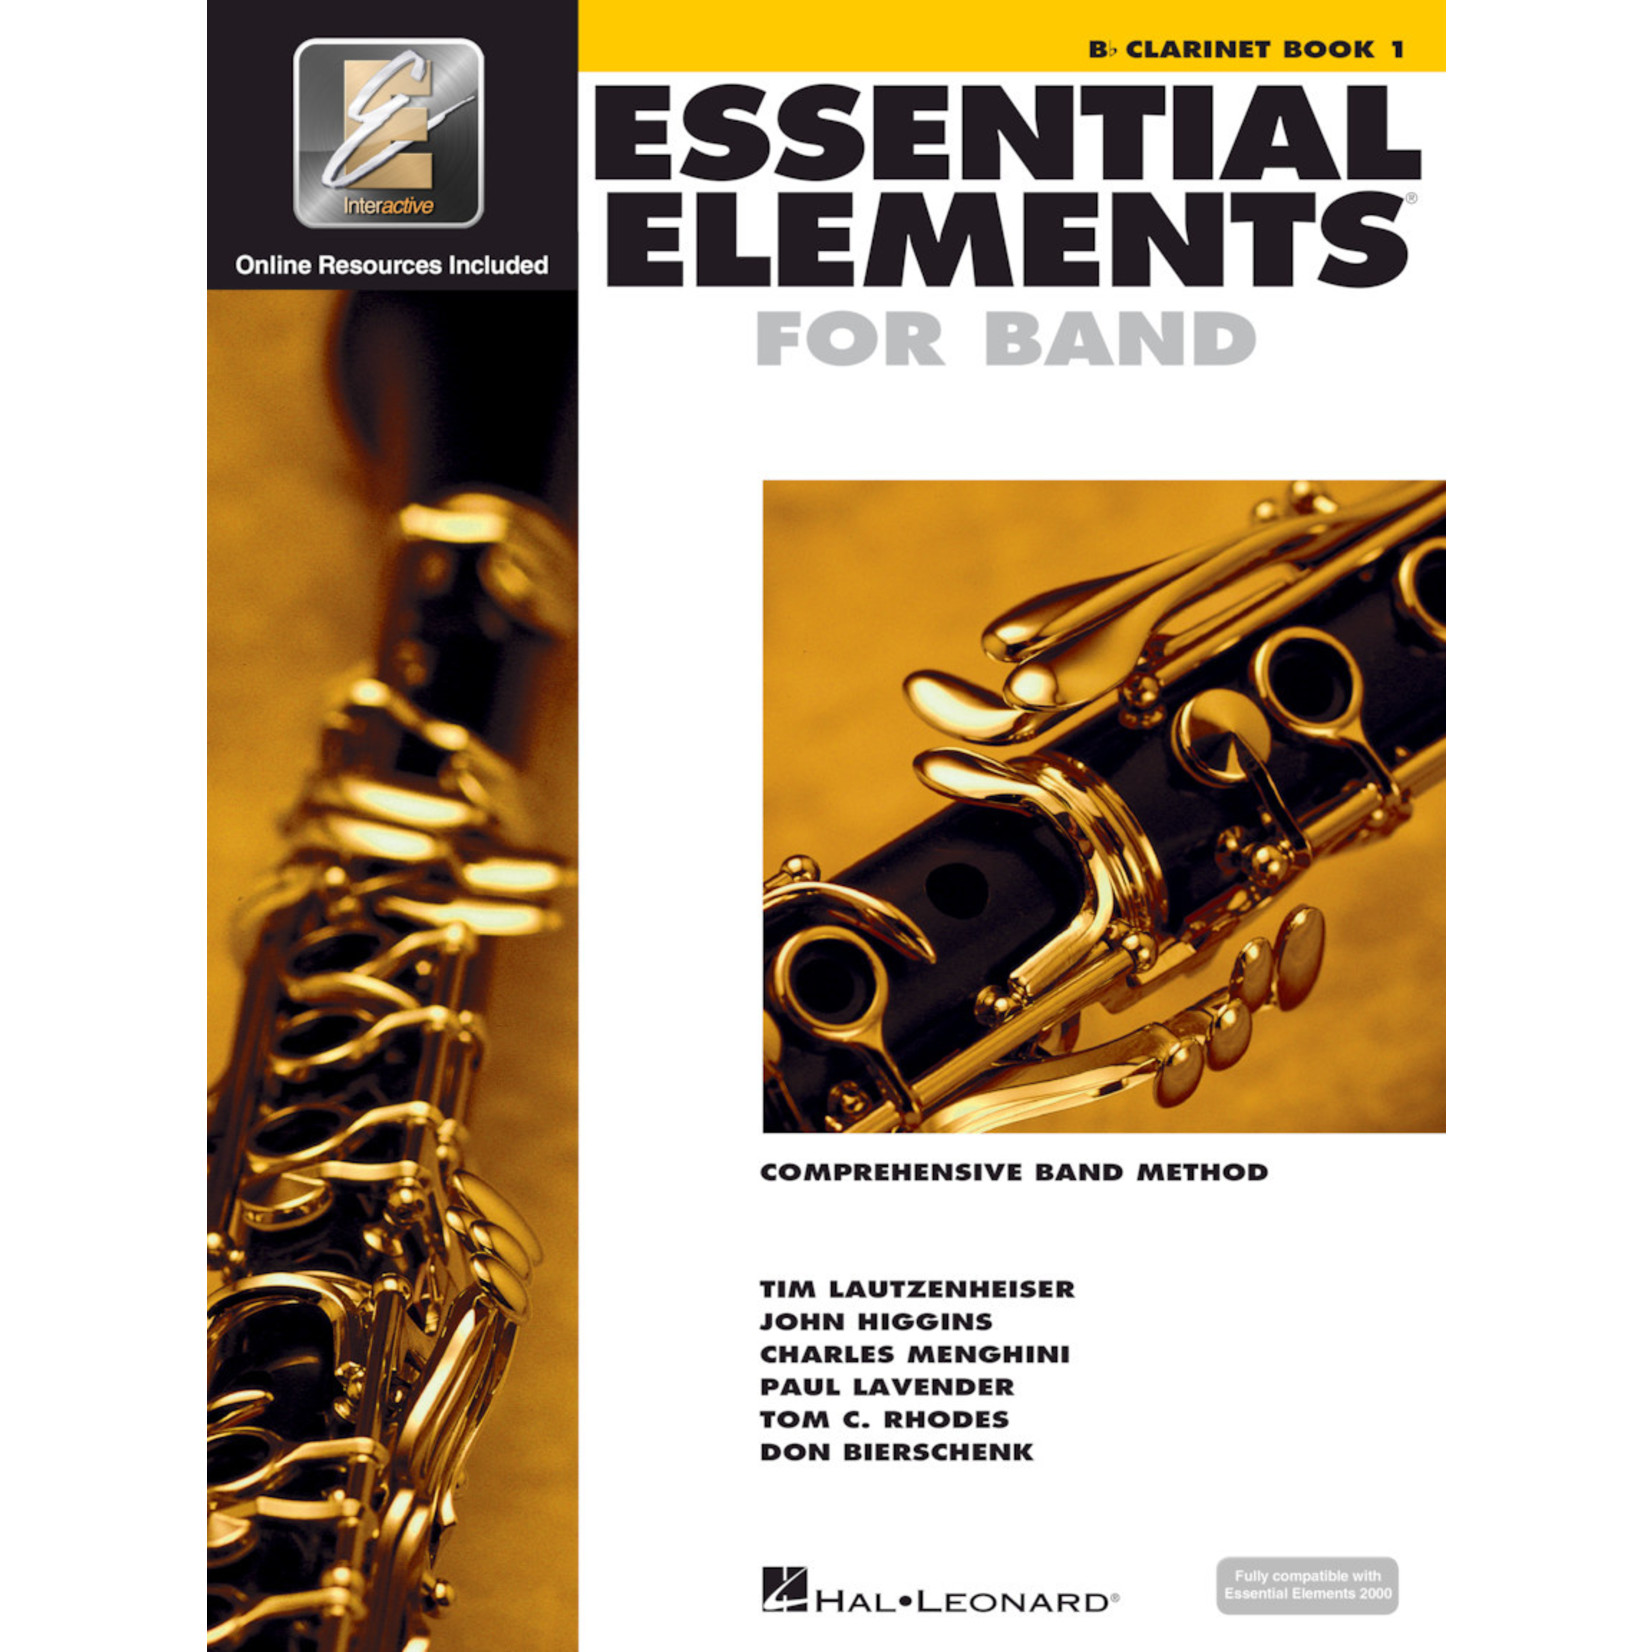 Hal Leonard Essential Elements for Band Clarinet Book 1